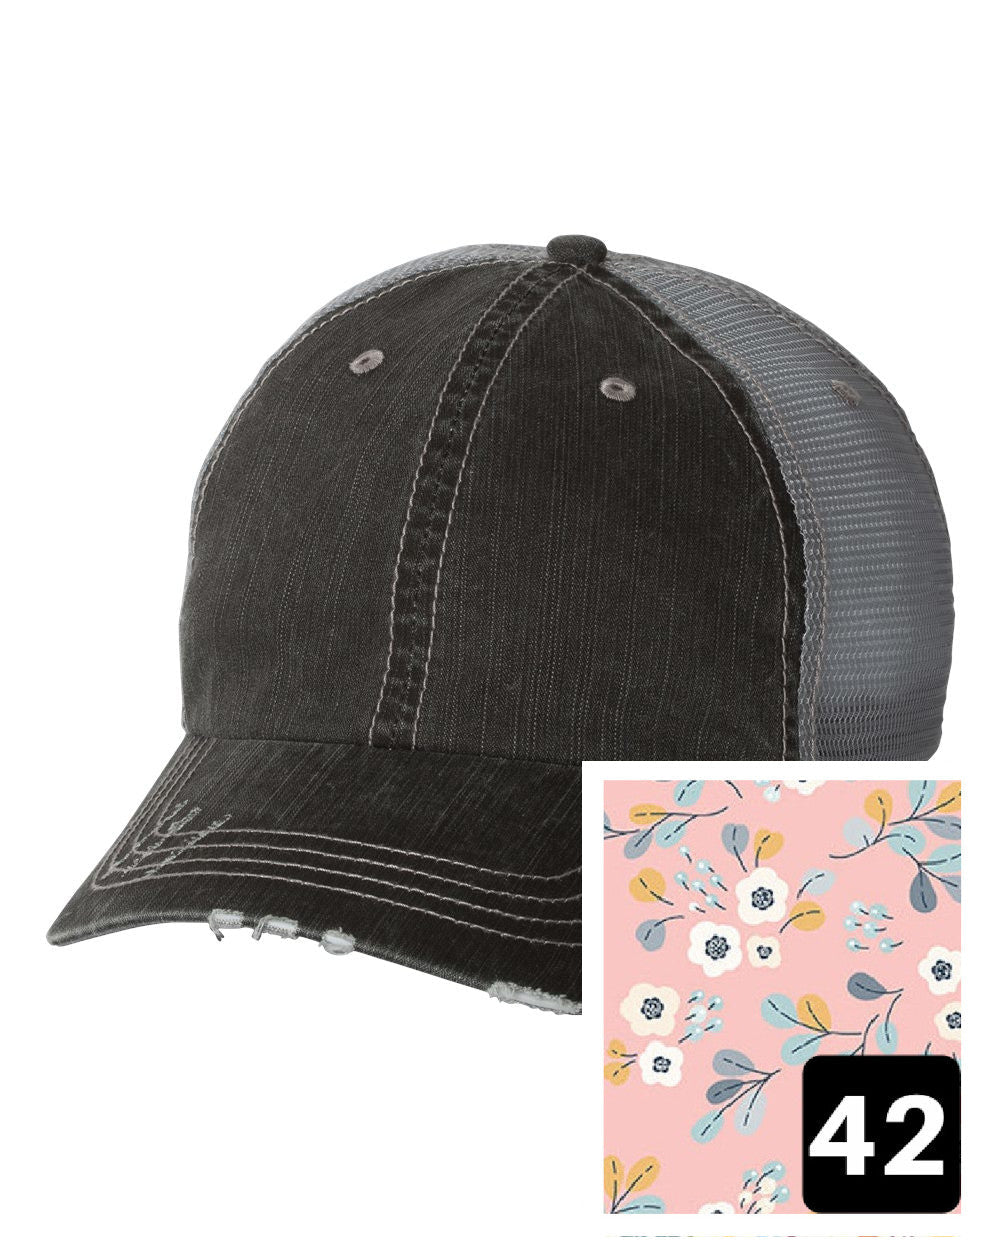 gray distressed trucker hat with light blue and pink mosaic fabric state of Tennessee